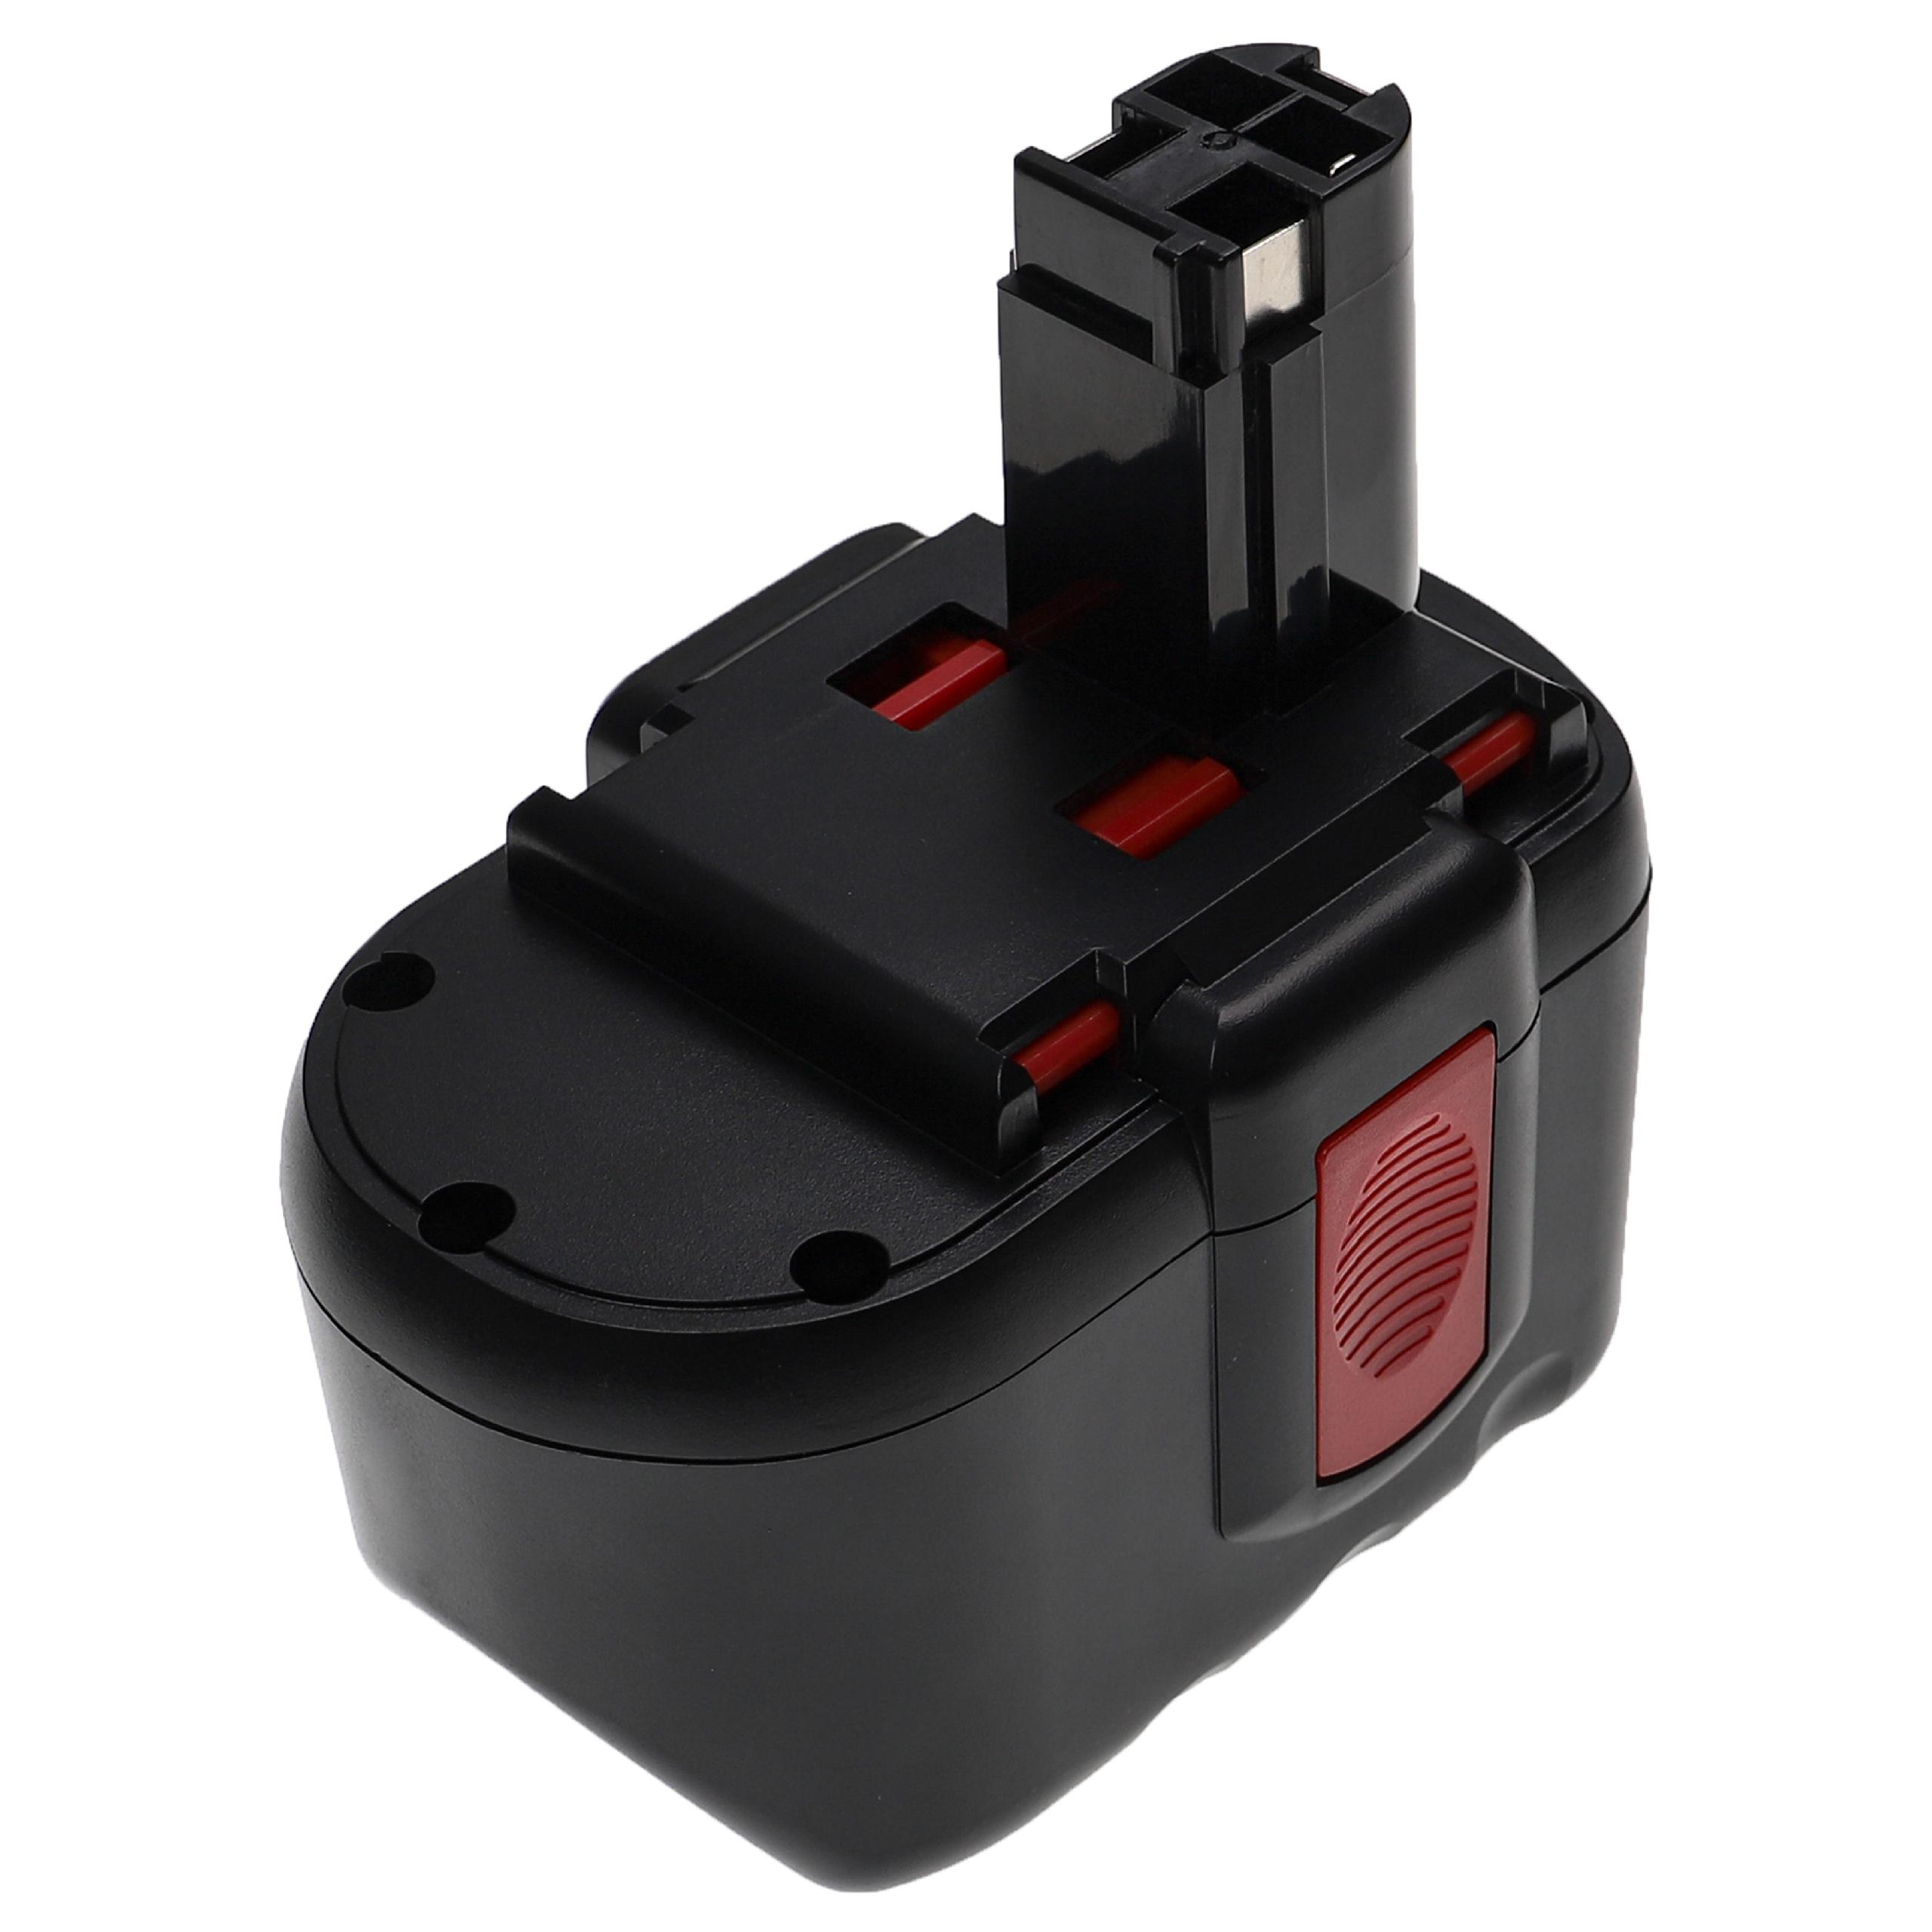 Electric Power Tool Battery Replaces Bosch 2607335280, 2607335279, 2607335268 - 3300 mAh, 24 V, NiMH